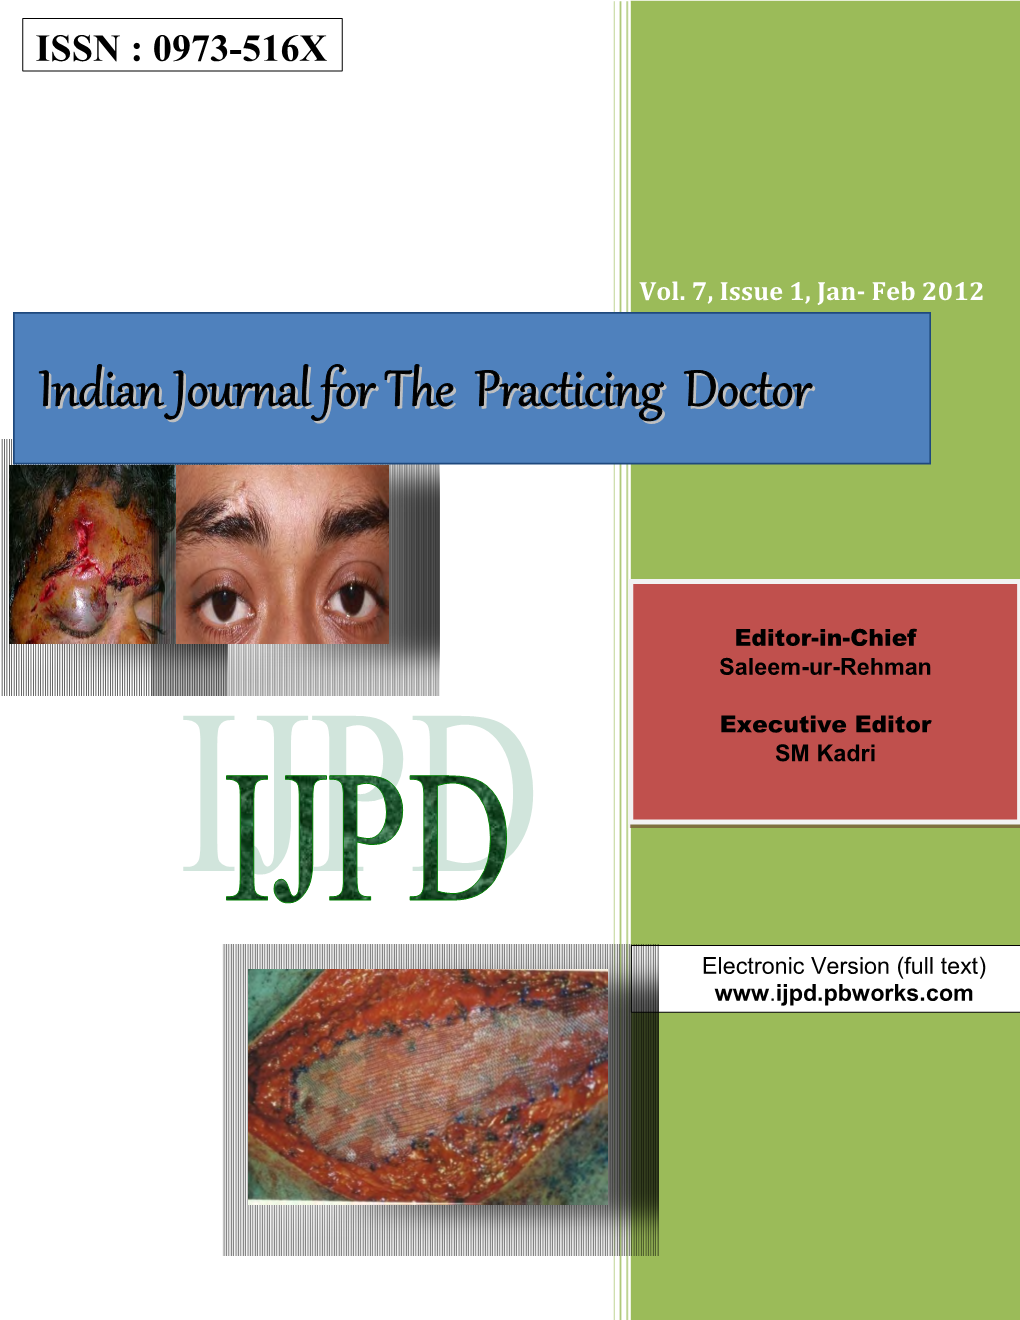 Indian Journal for the Practicing Doctor Vol 7 Issue 1